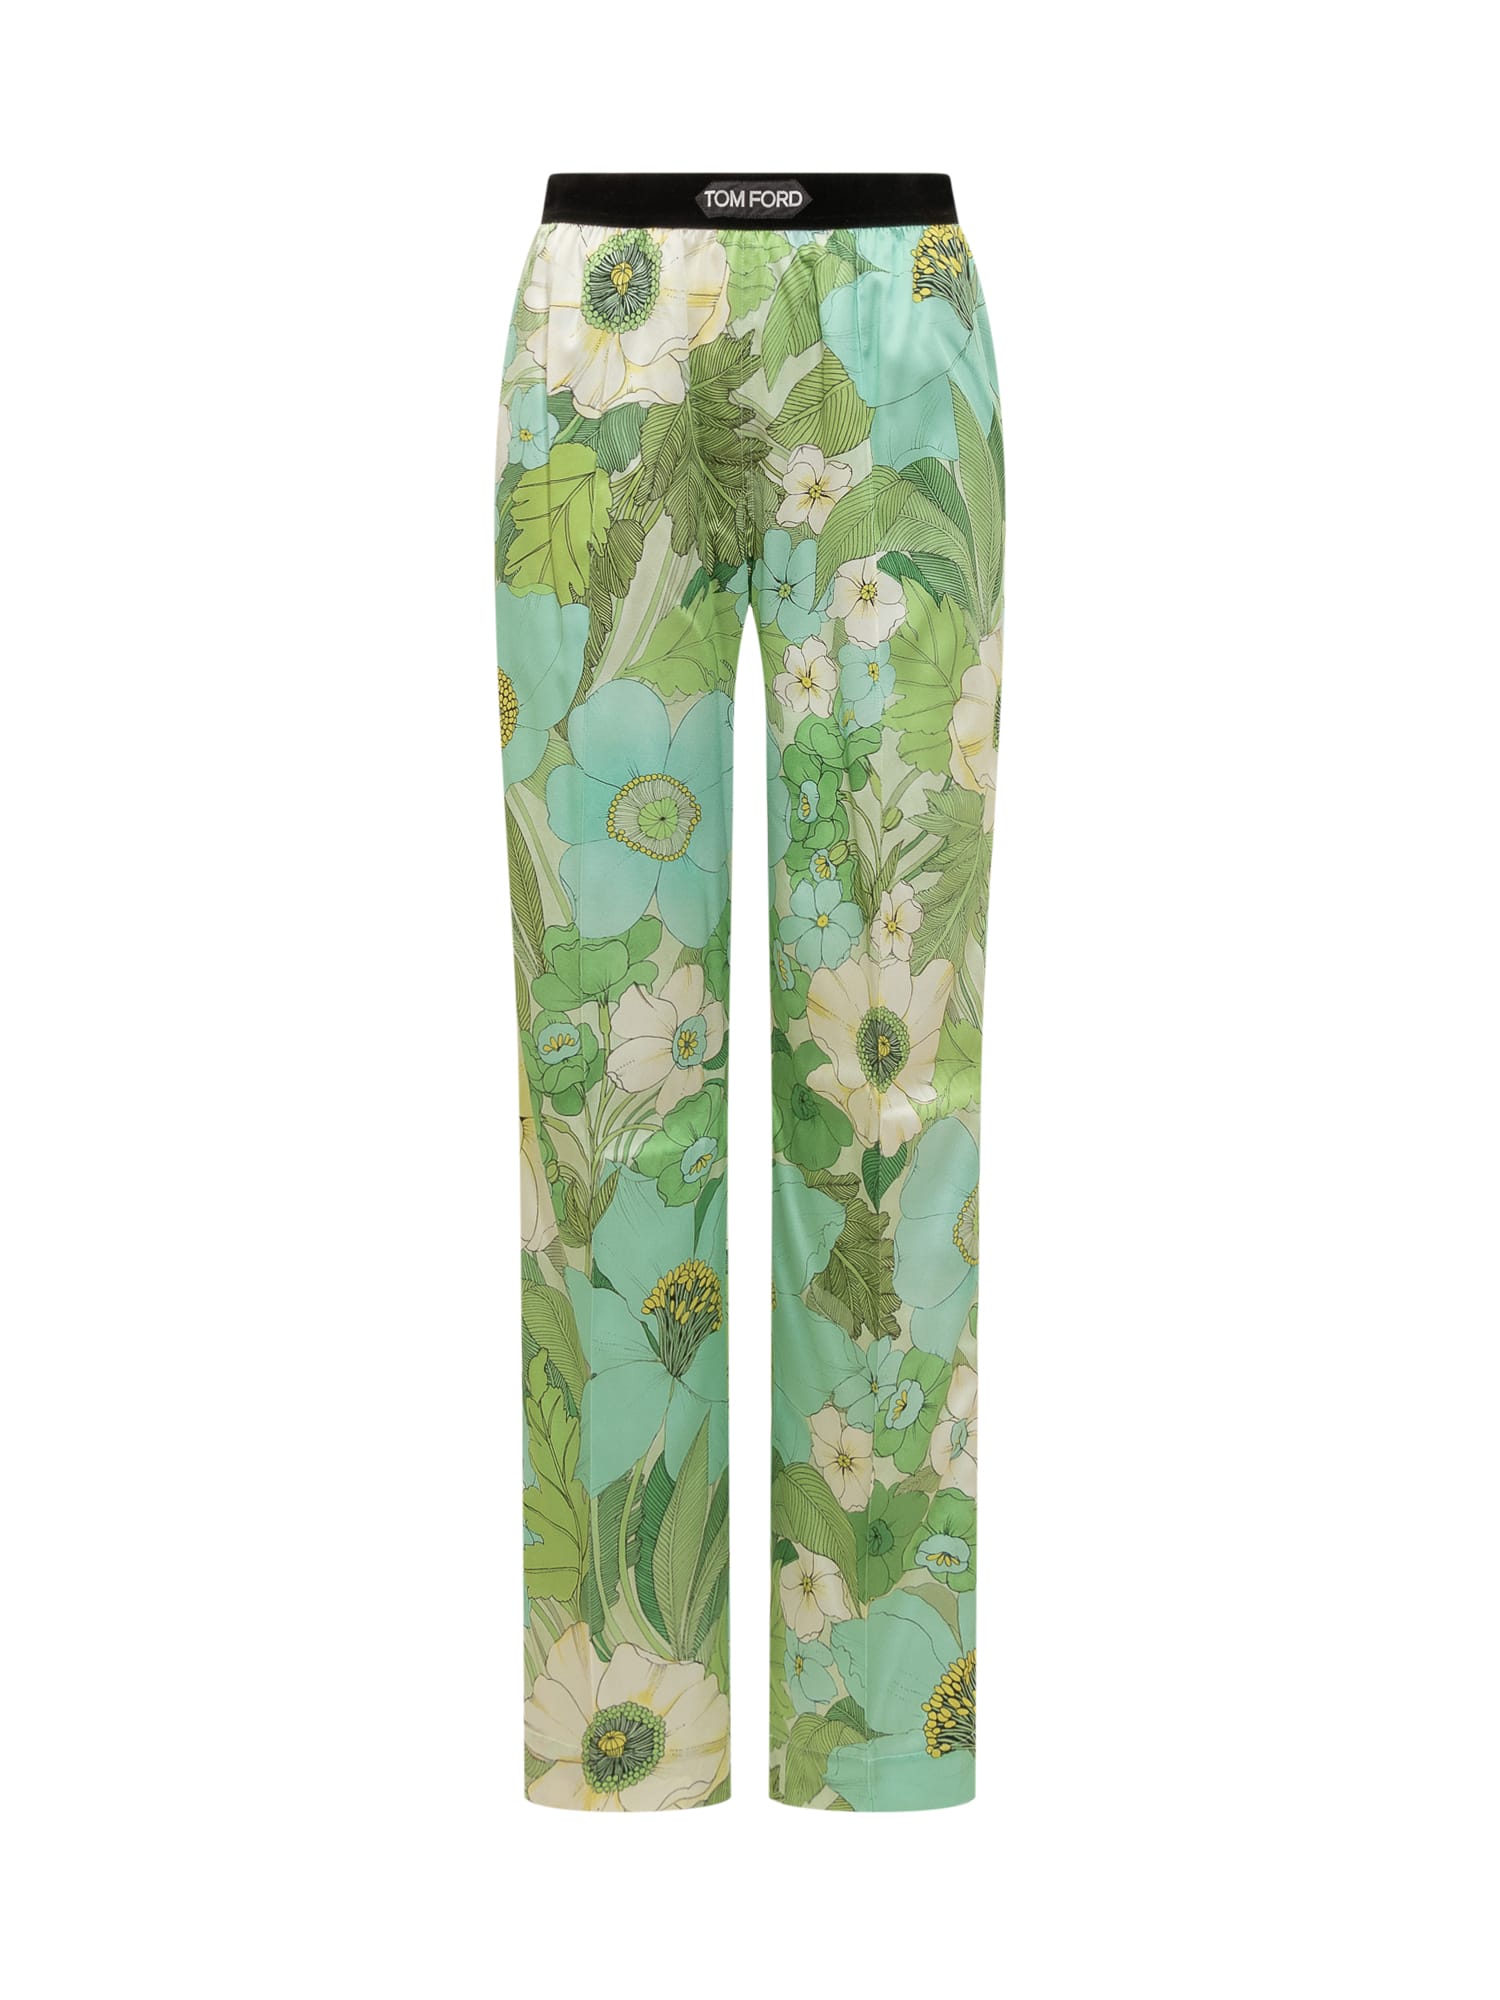 TOM FORD PANTS WITH FLORAL DECORATION